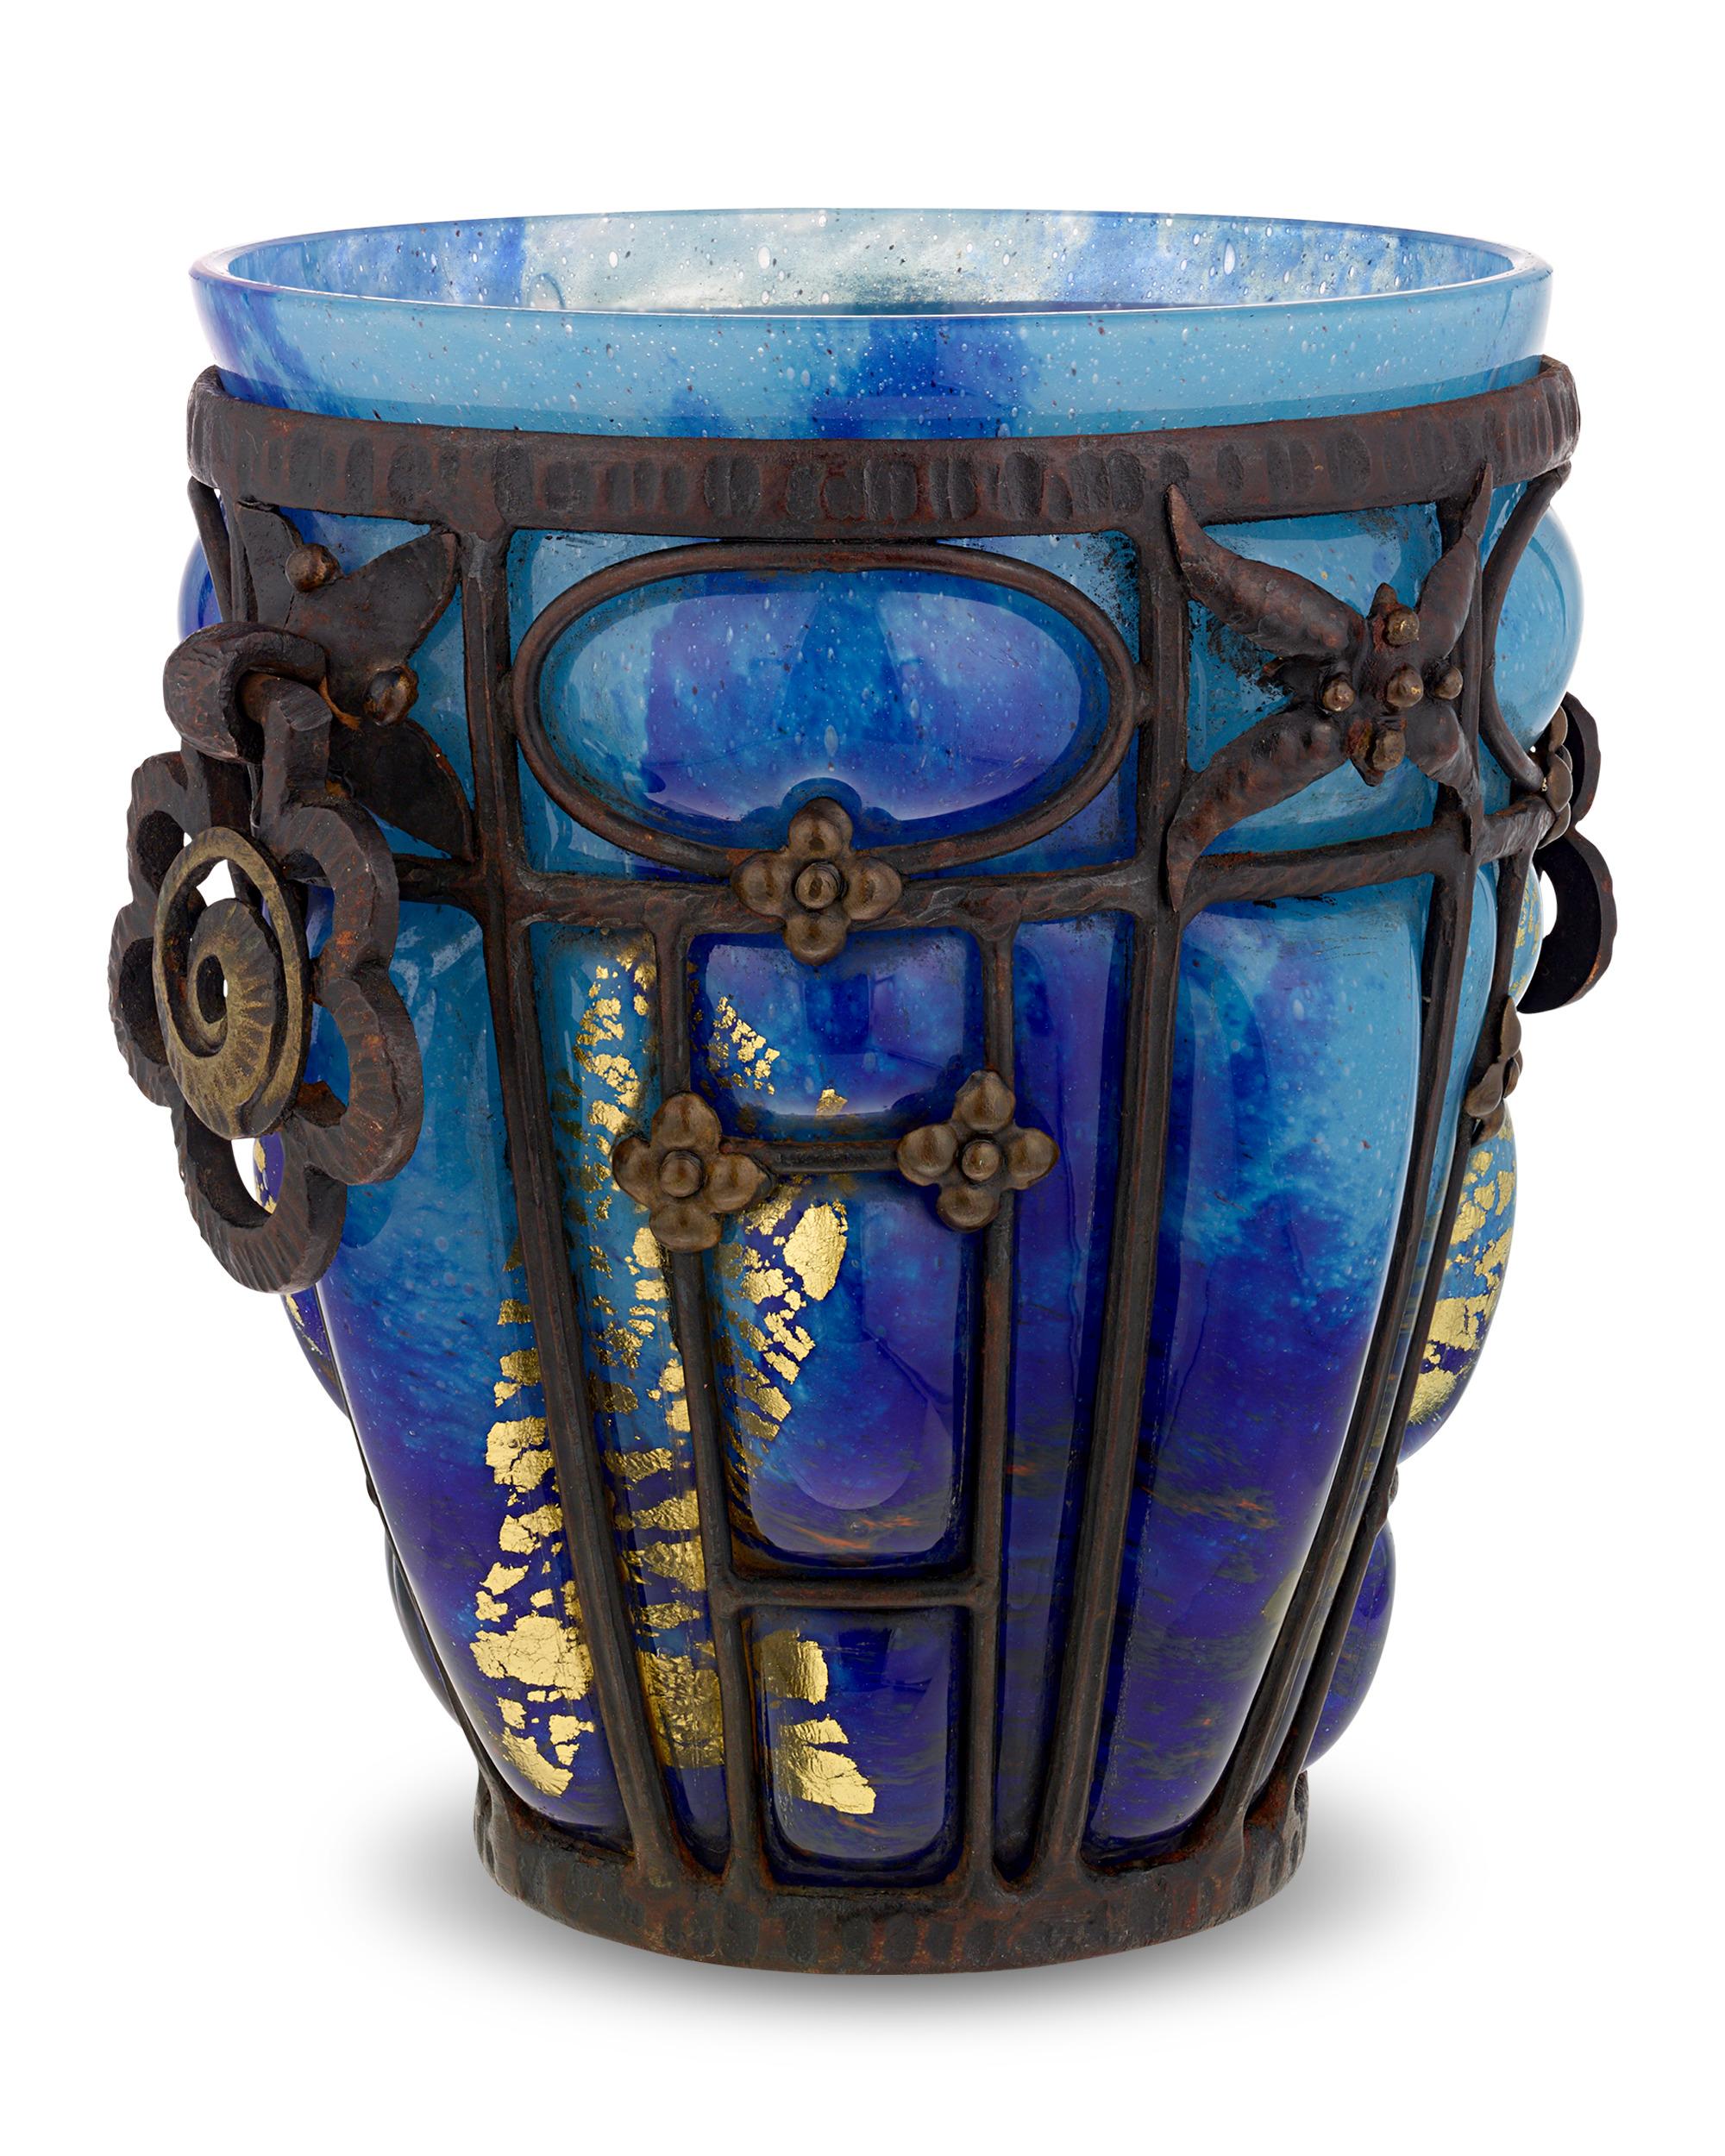 This exquisite glass and wrought iron vase is the result of one of the most iconic Art Deco artistic collaborations between Daum Nancy and Louis Majorelle. Each renowned for their unrivaled craftsmanship and unique design aesthetics, Daum and